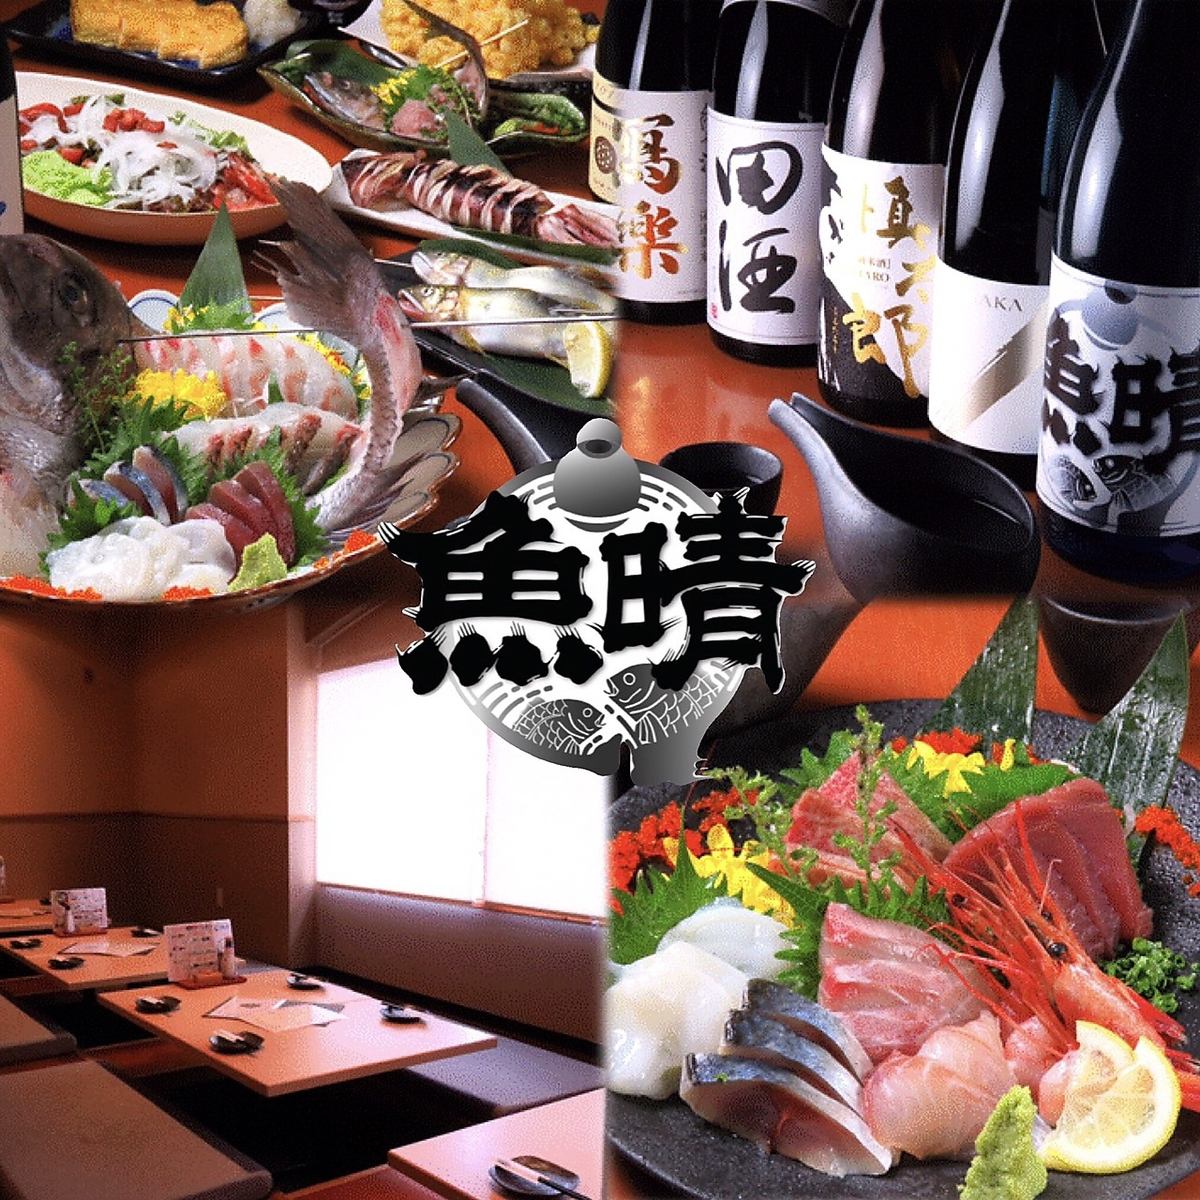 A popular shop in Machida where you can enjoy fresh seafood and seasonal local sake! A 3-minute walk from the station!